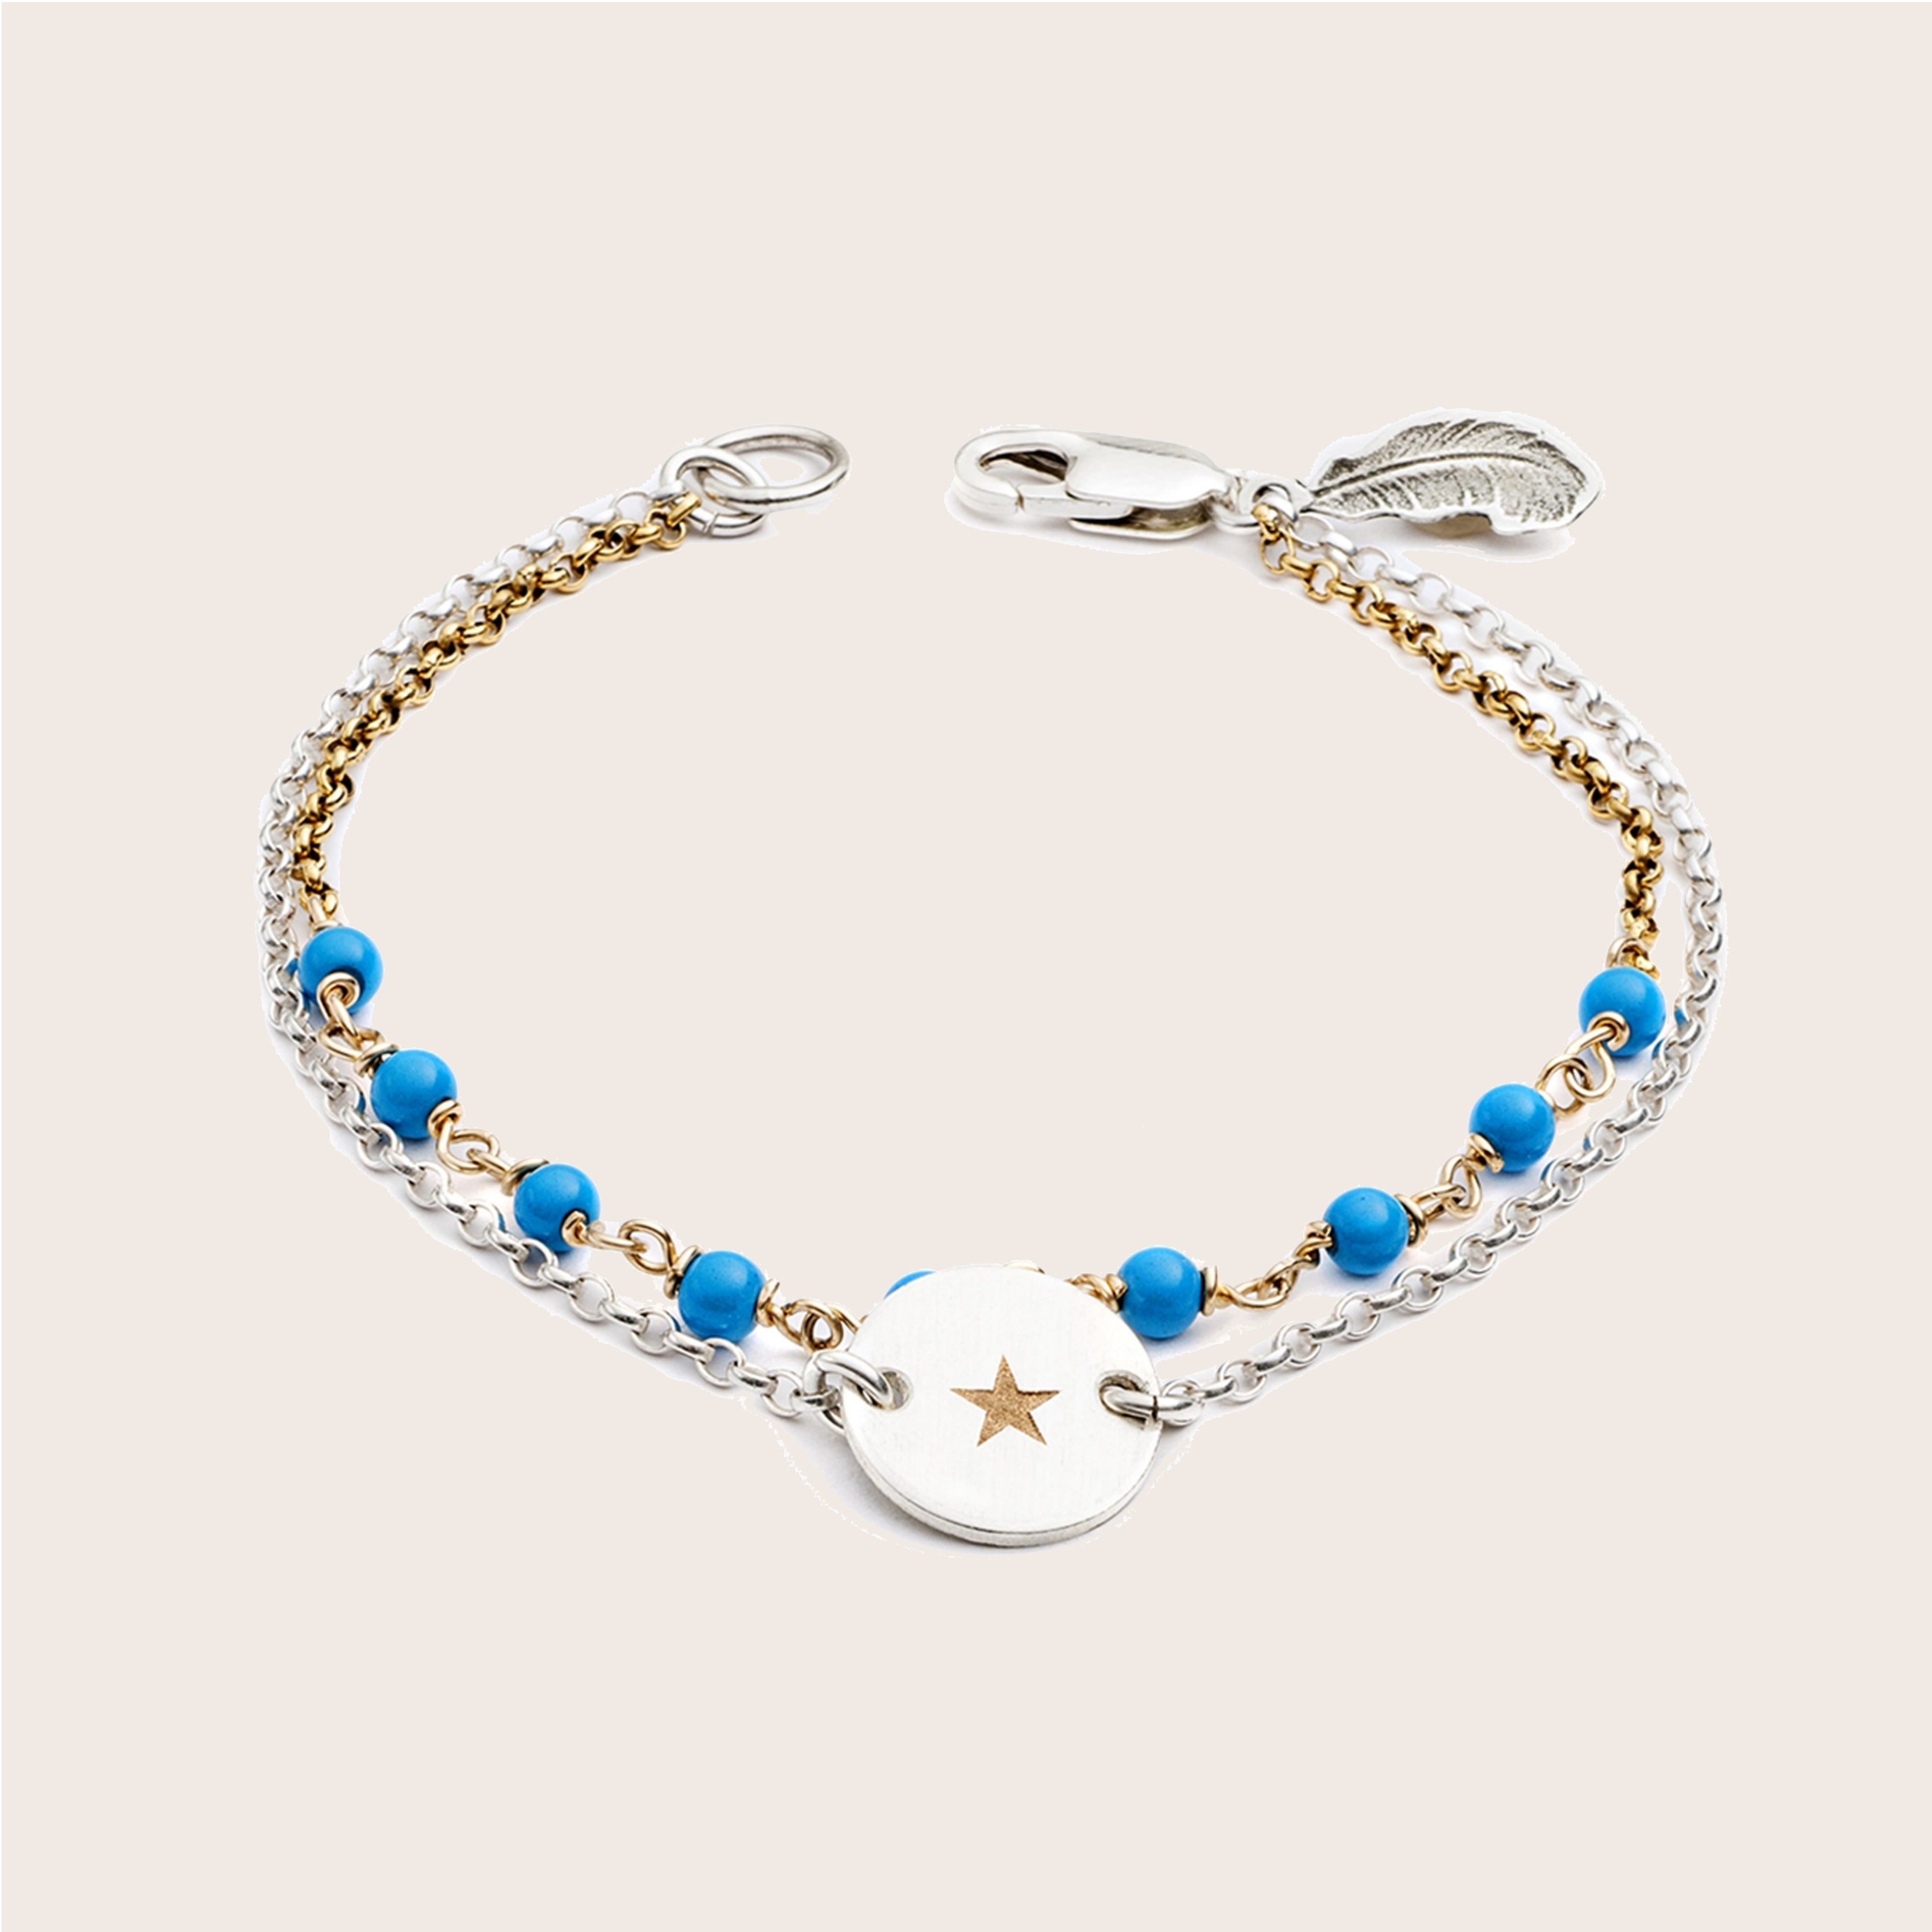 Engraved Star and Wish bracelet with Gold Silver Turquoise - harryrockslondon